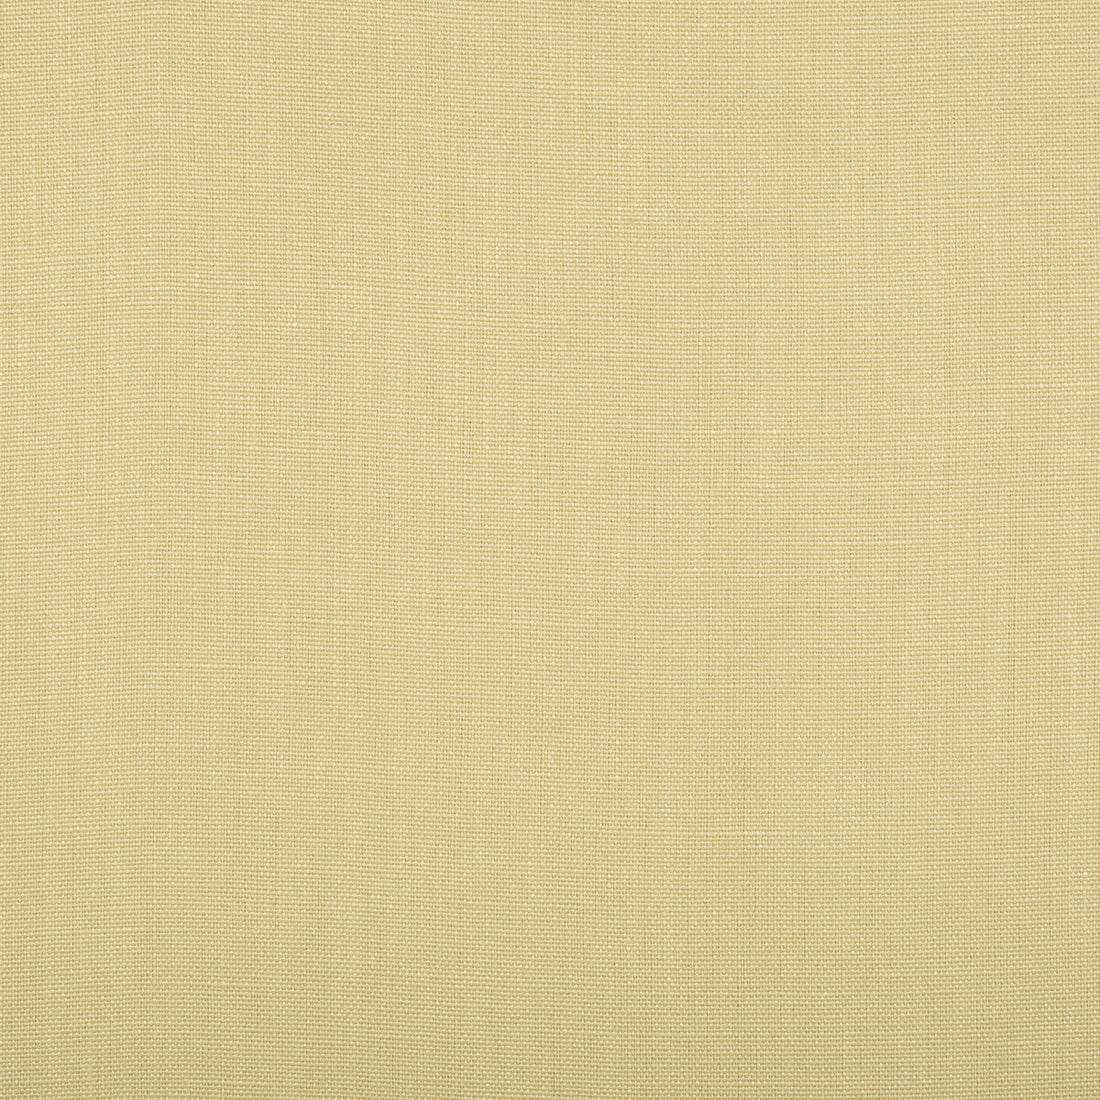 Stone Harbor fabric in antique color - pattern 27591.416.0 - by Kravet Basics